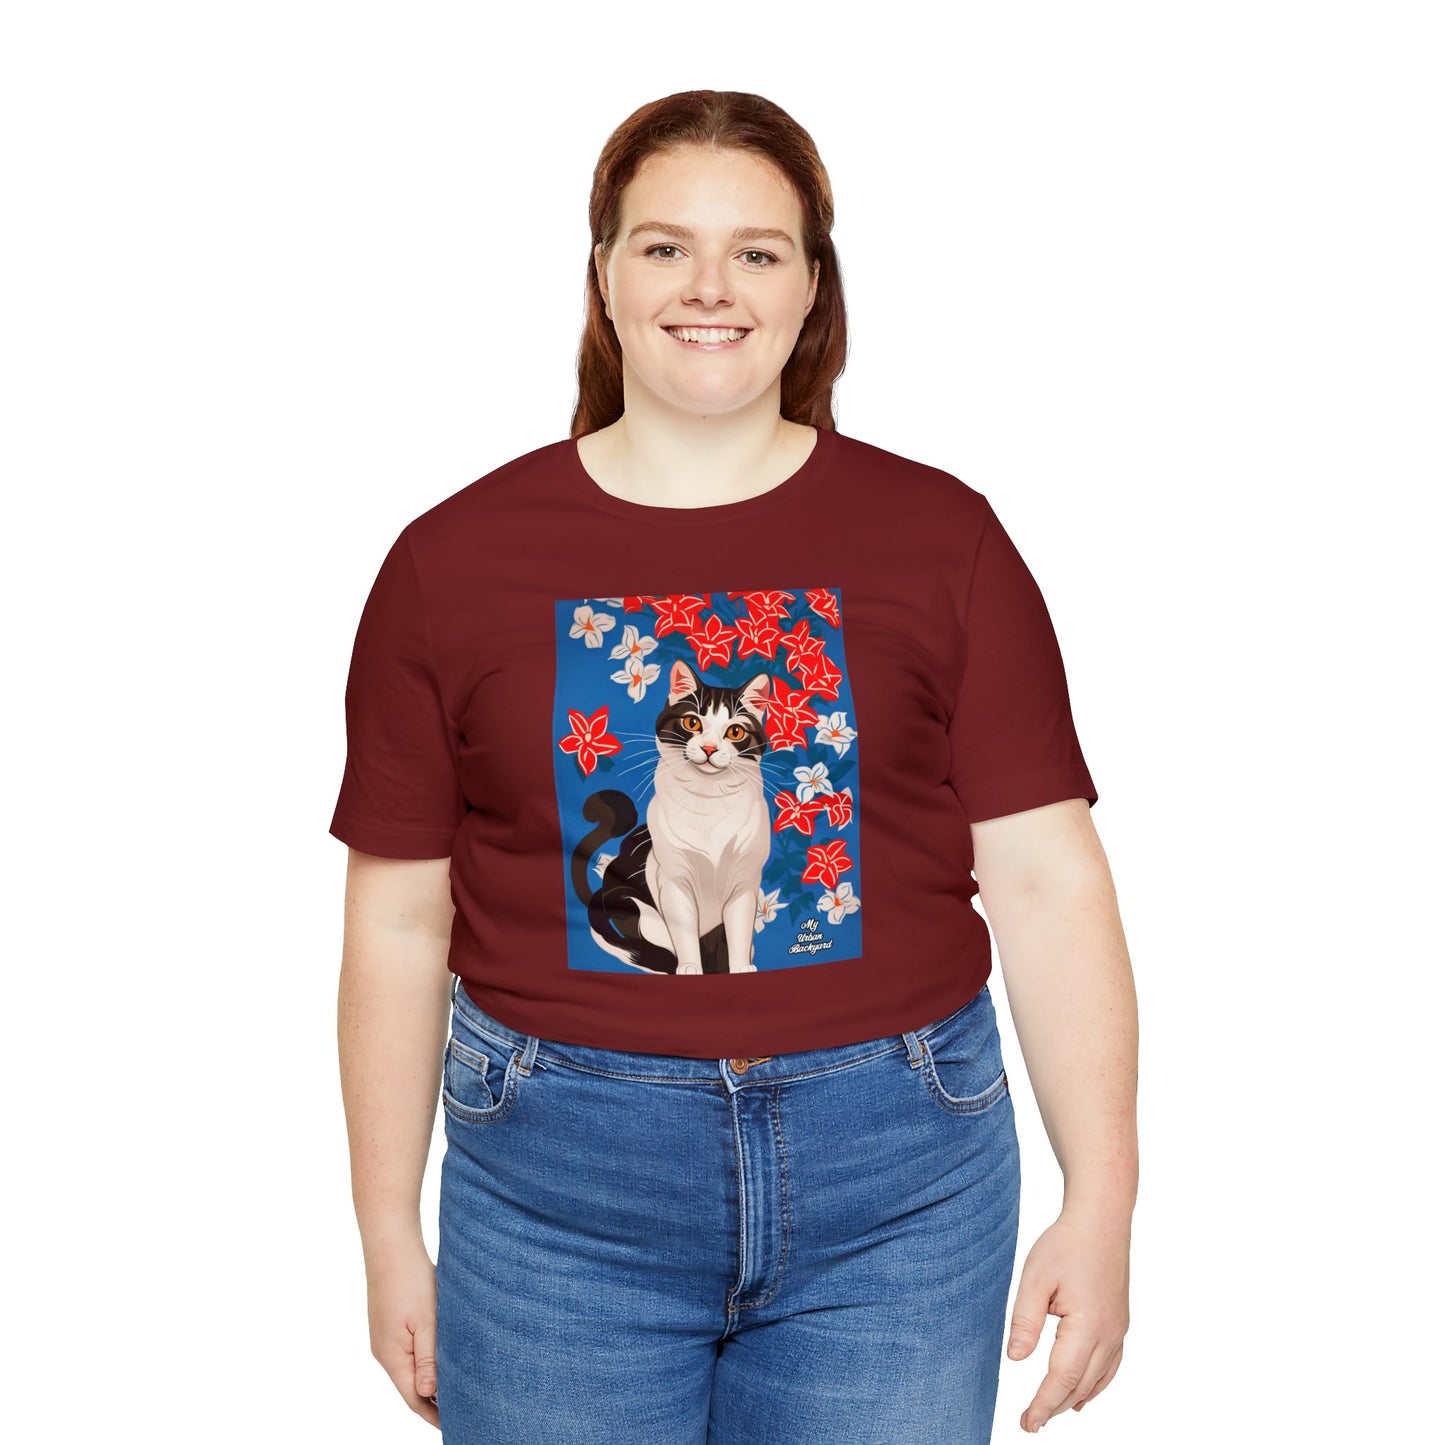 Cat with Red and White Flowers, Soft 100% Jersey Cotton T-Shirt, Unisex, Short Sleeve, Retail Fit